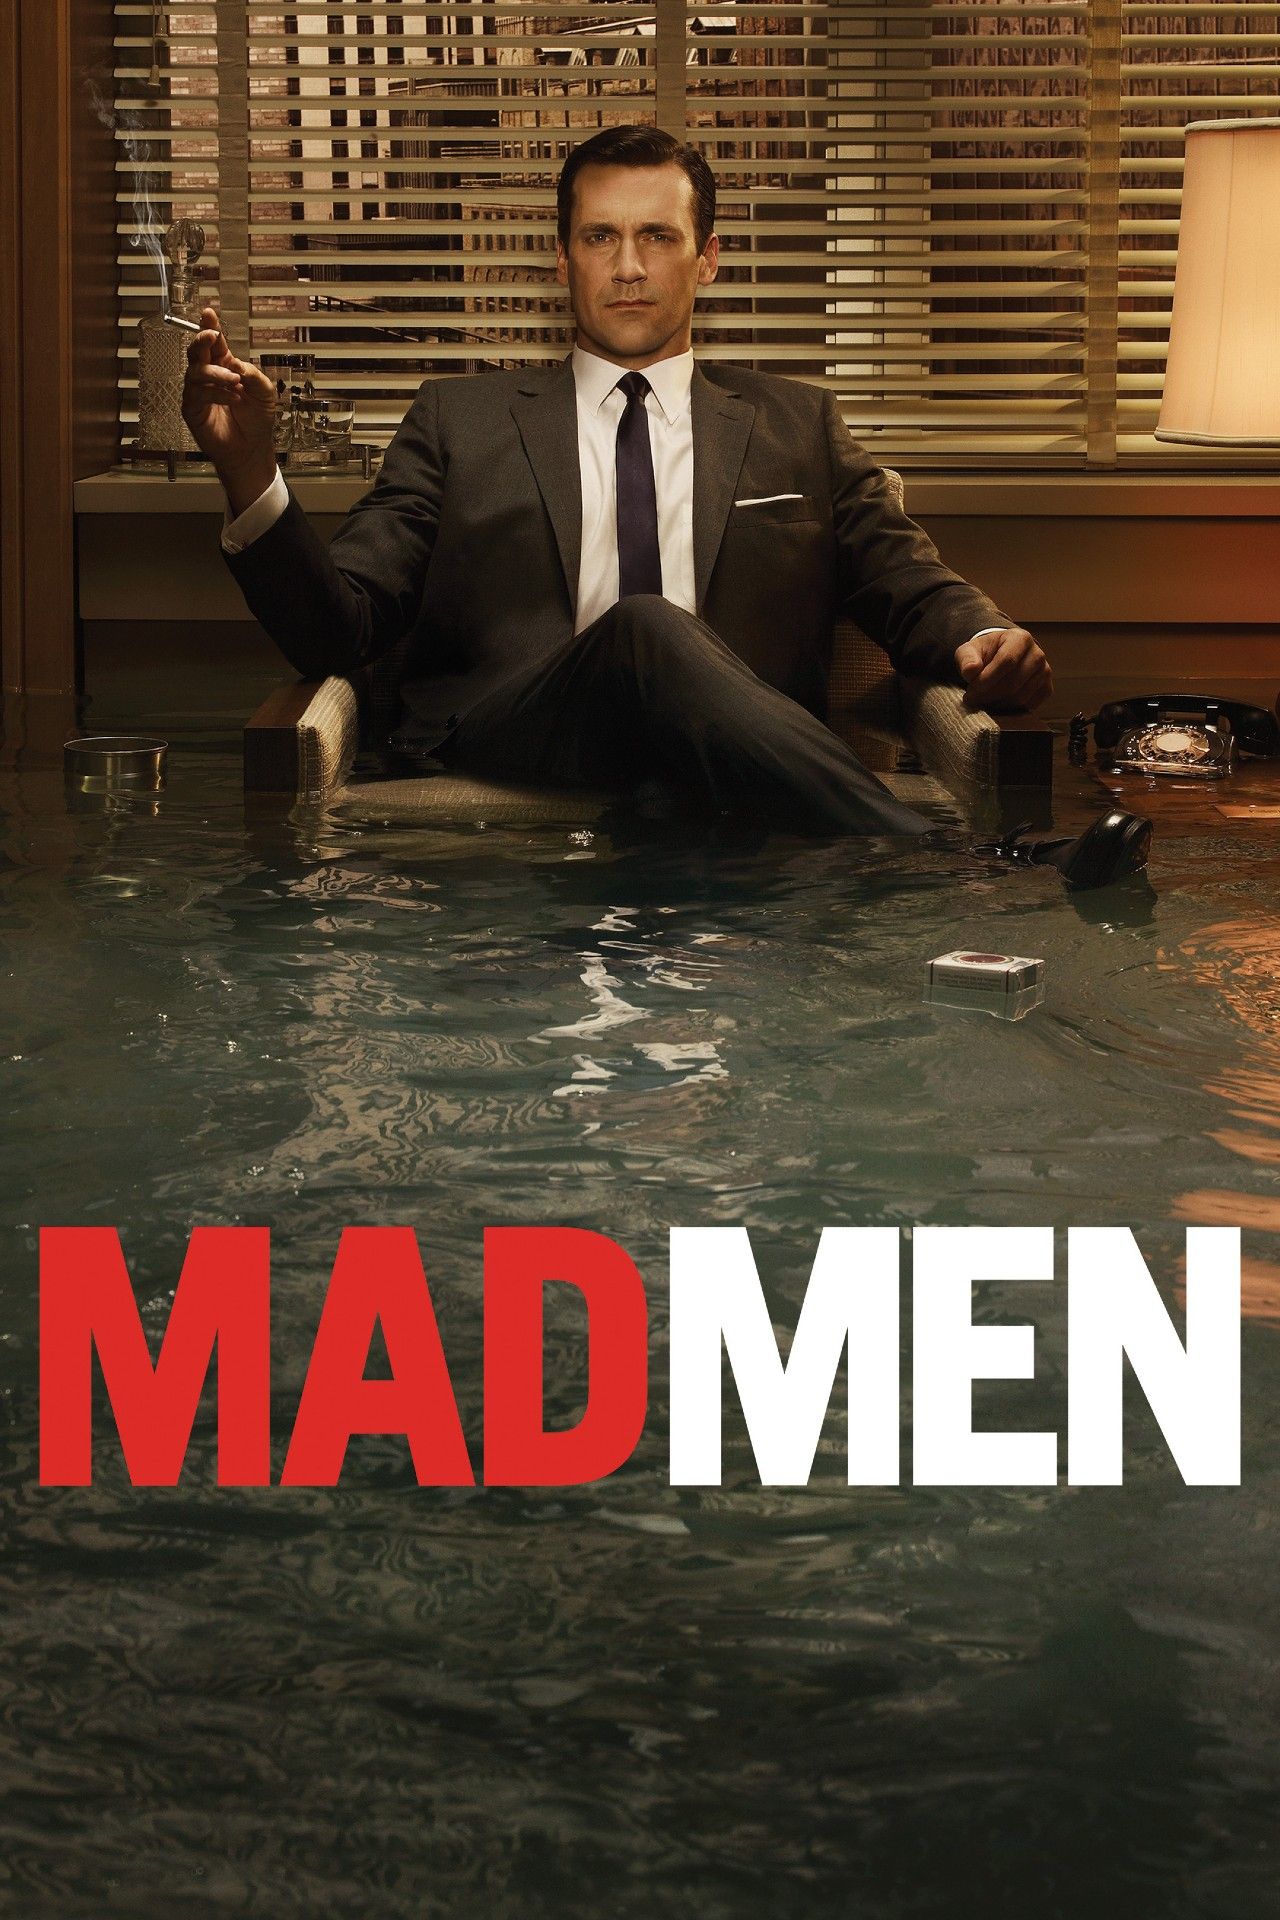 Poster for the “Mad Men” series